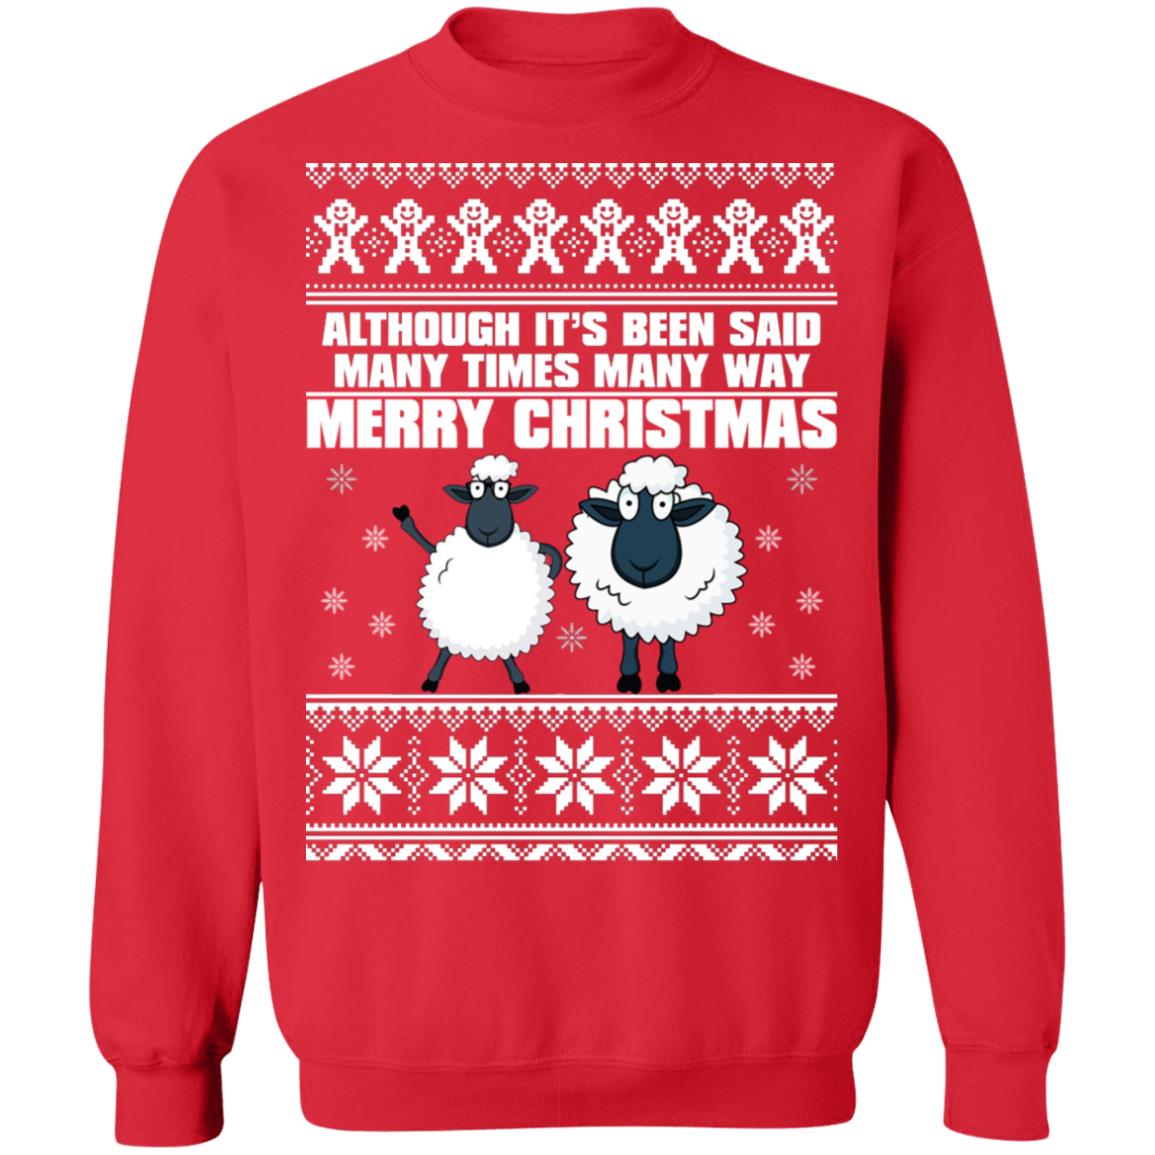 All Thought Its Been Said Merry Christmas Sweater